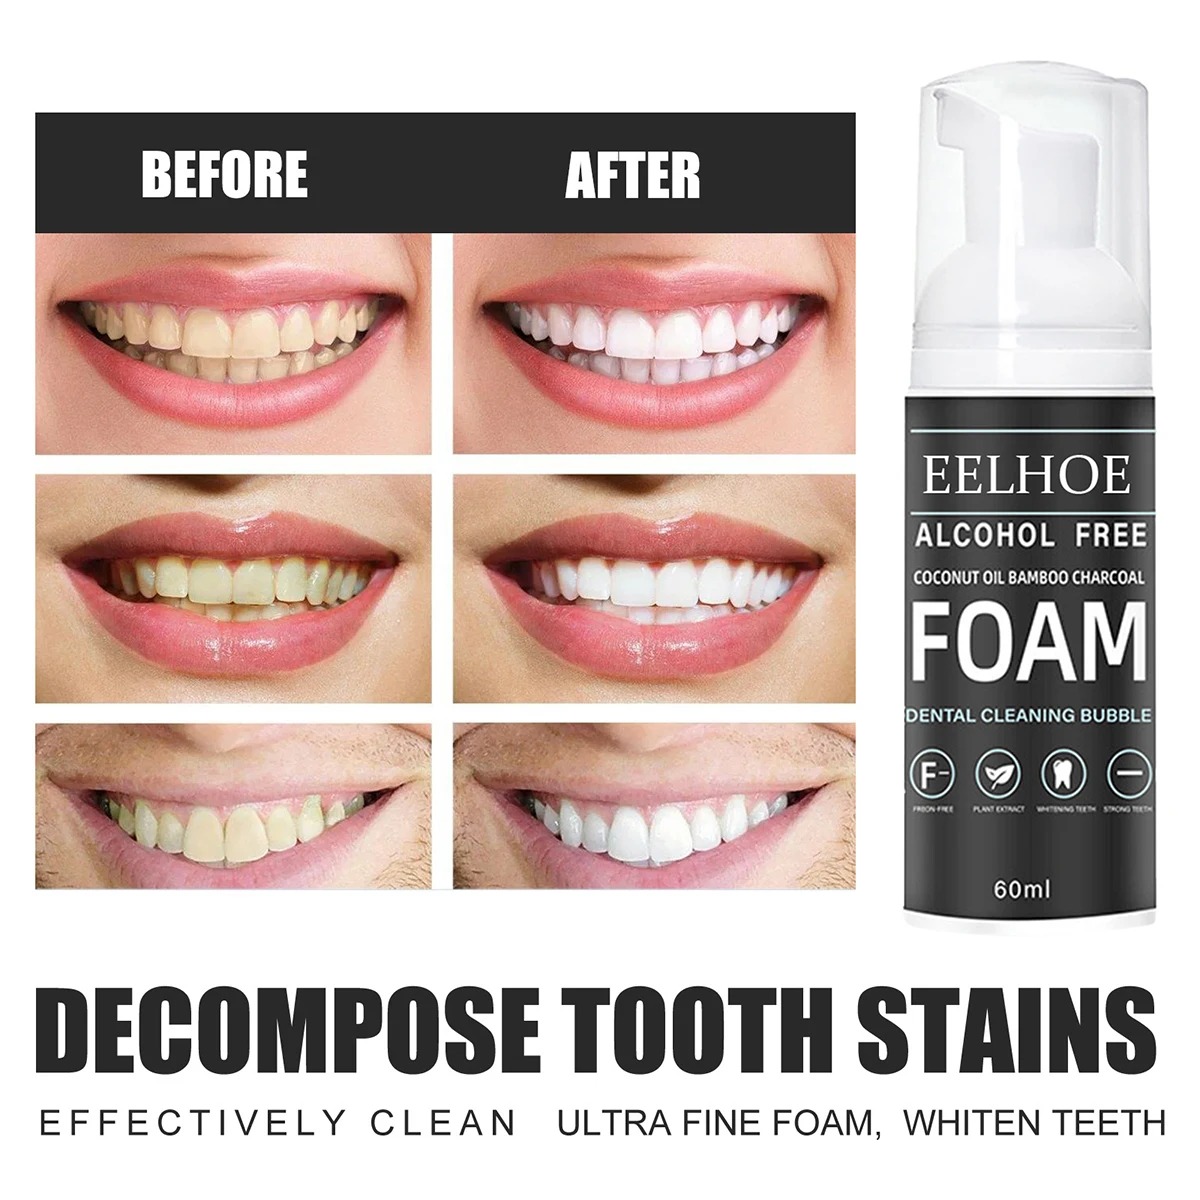 

Teeth Whitening Coconut Oil Bamboo Charcoal Foam Toothpaste Coffee Fresh Breath Bad Breath Clean Stains Dazzle White 60ml